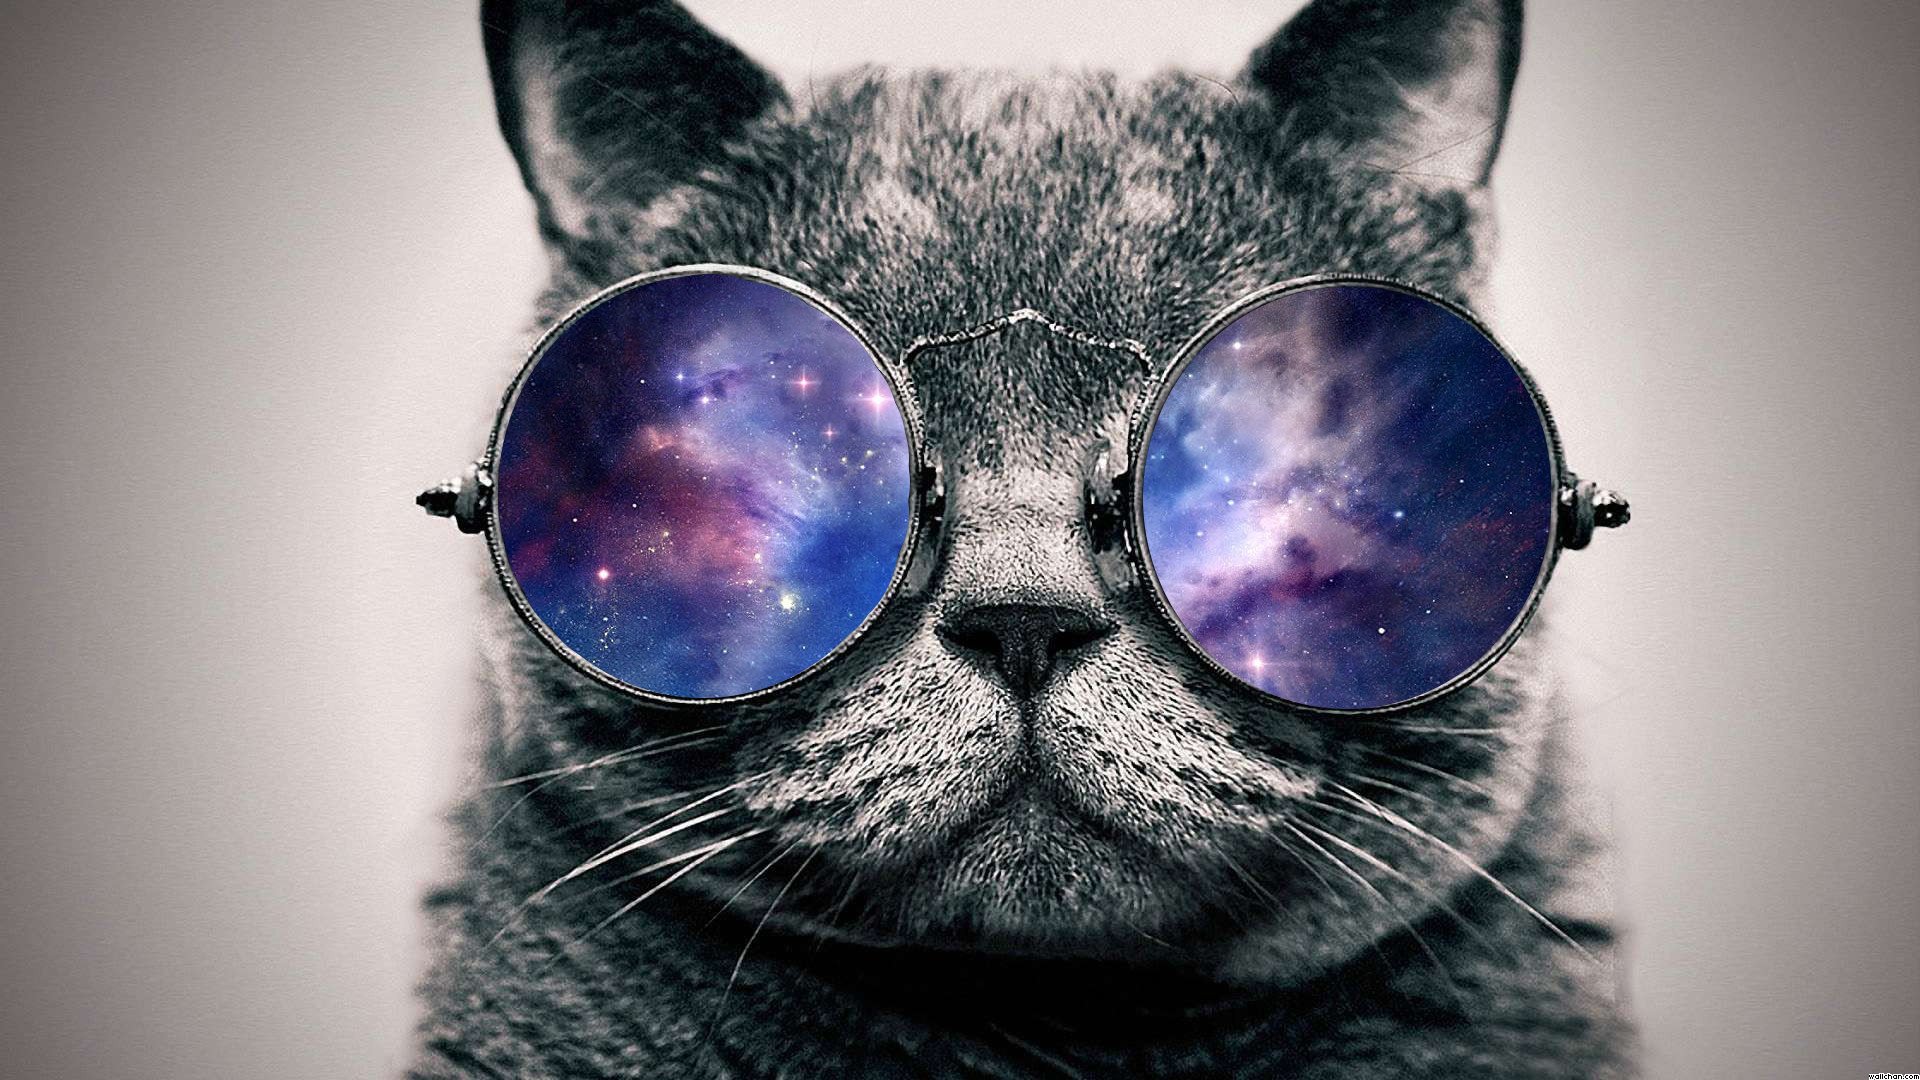 Cat in Space wallpapers and images   wallpapers pictures photos 1920x1080